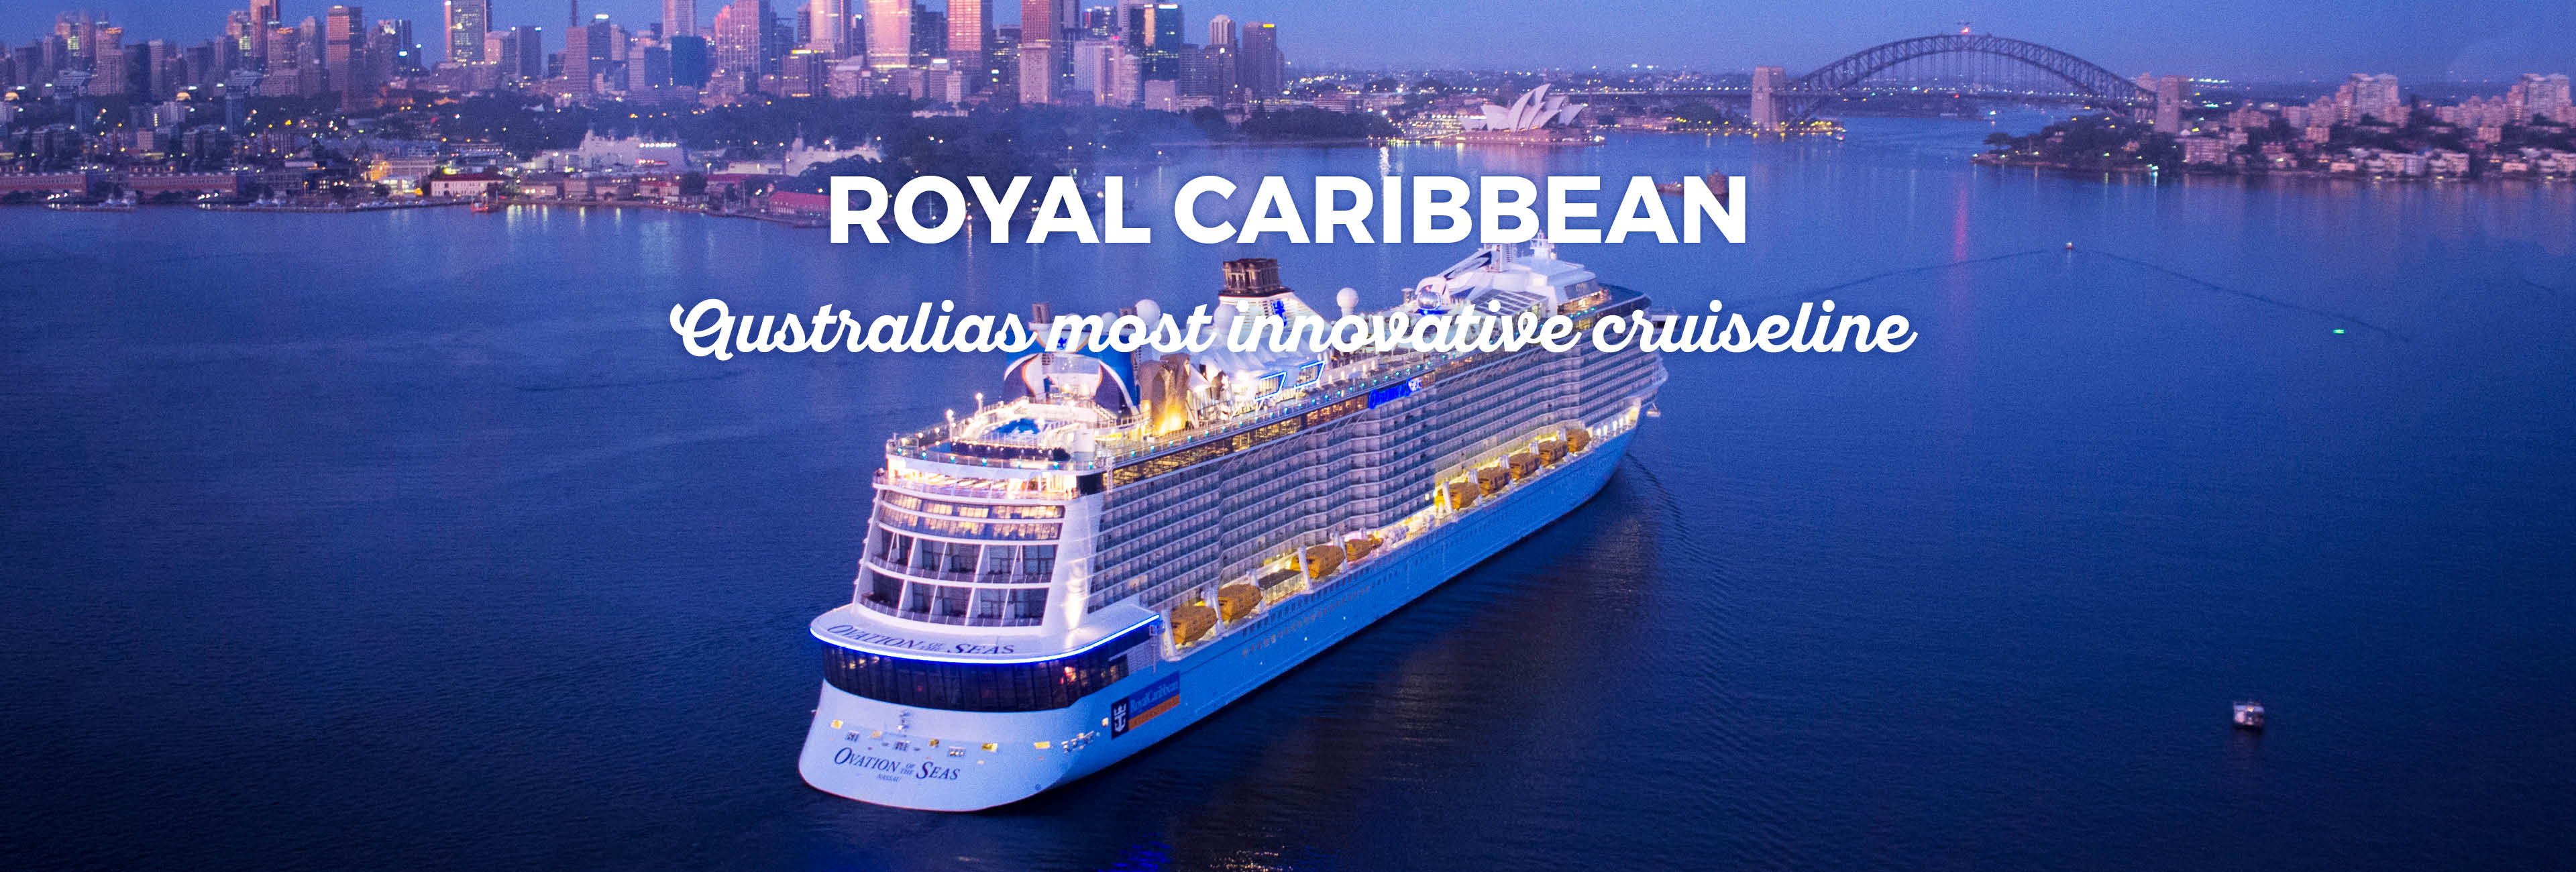 Royal Caribbean Cruise Deals | The best cruise bargains on Royal